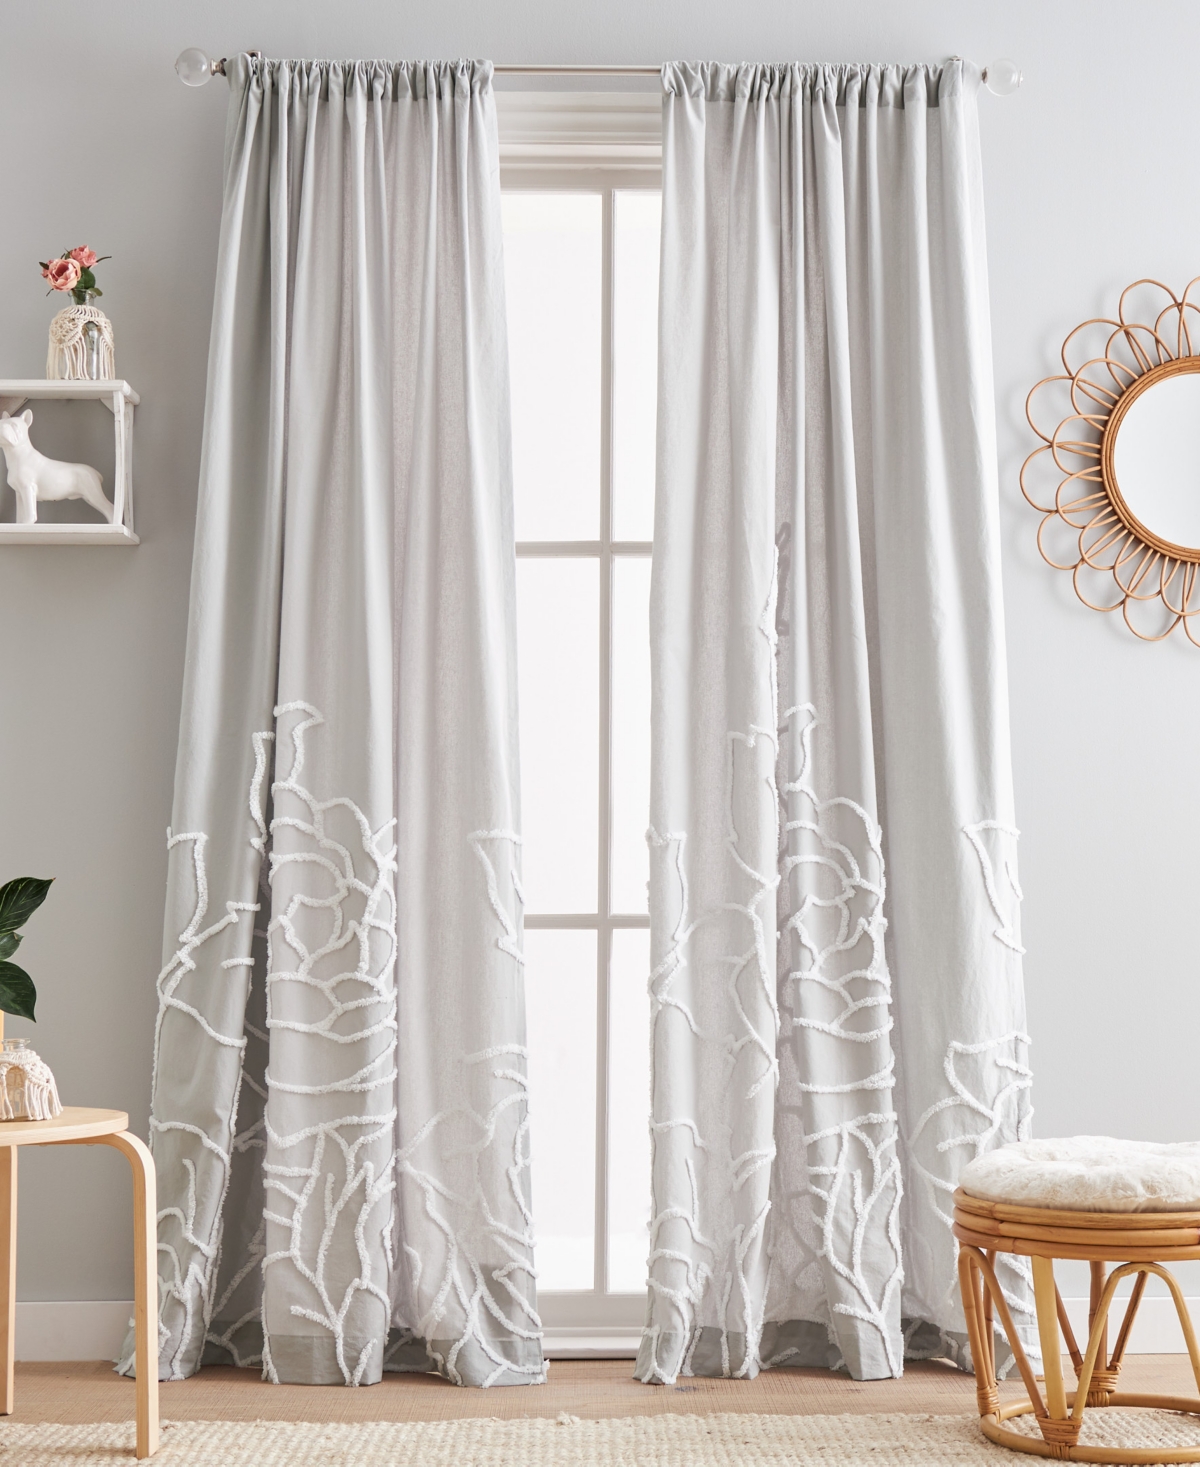 Peri Home Chenille Rose Pole Top 2-piece Curtain Panel Set, 50" X 84" In Silver